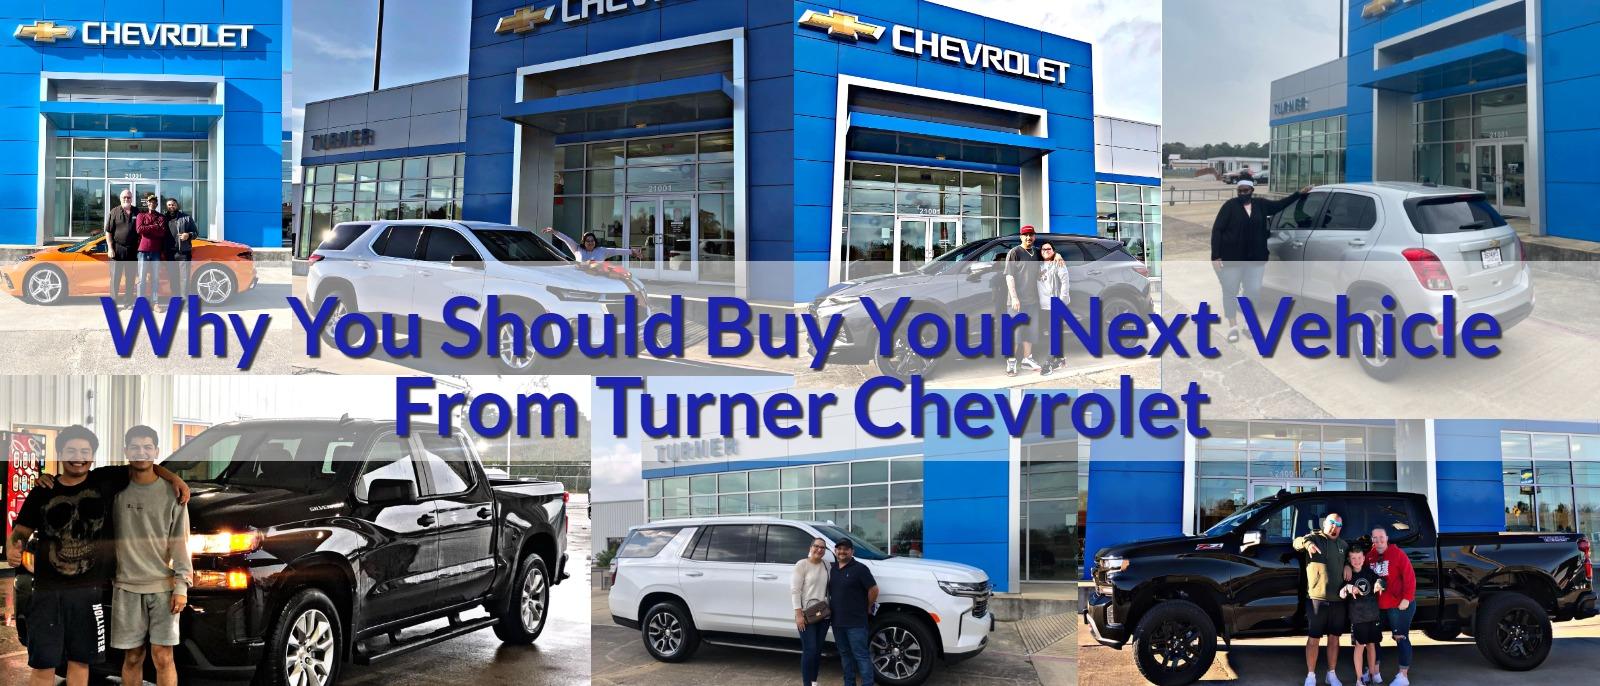 Why You Should Buy Your Next Vehicle From Turner Chevrolet